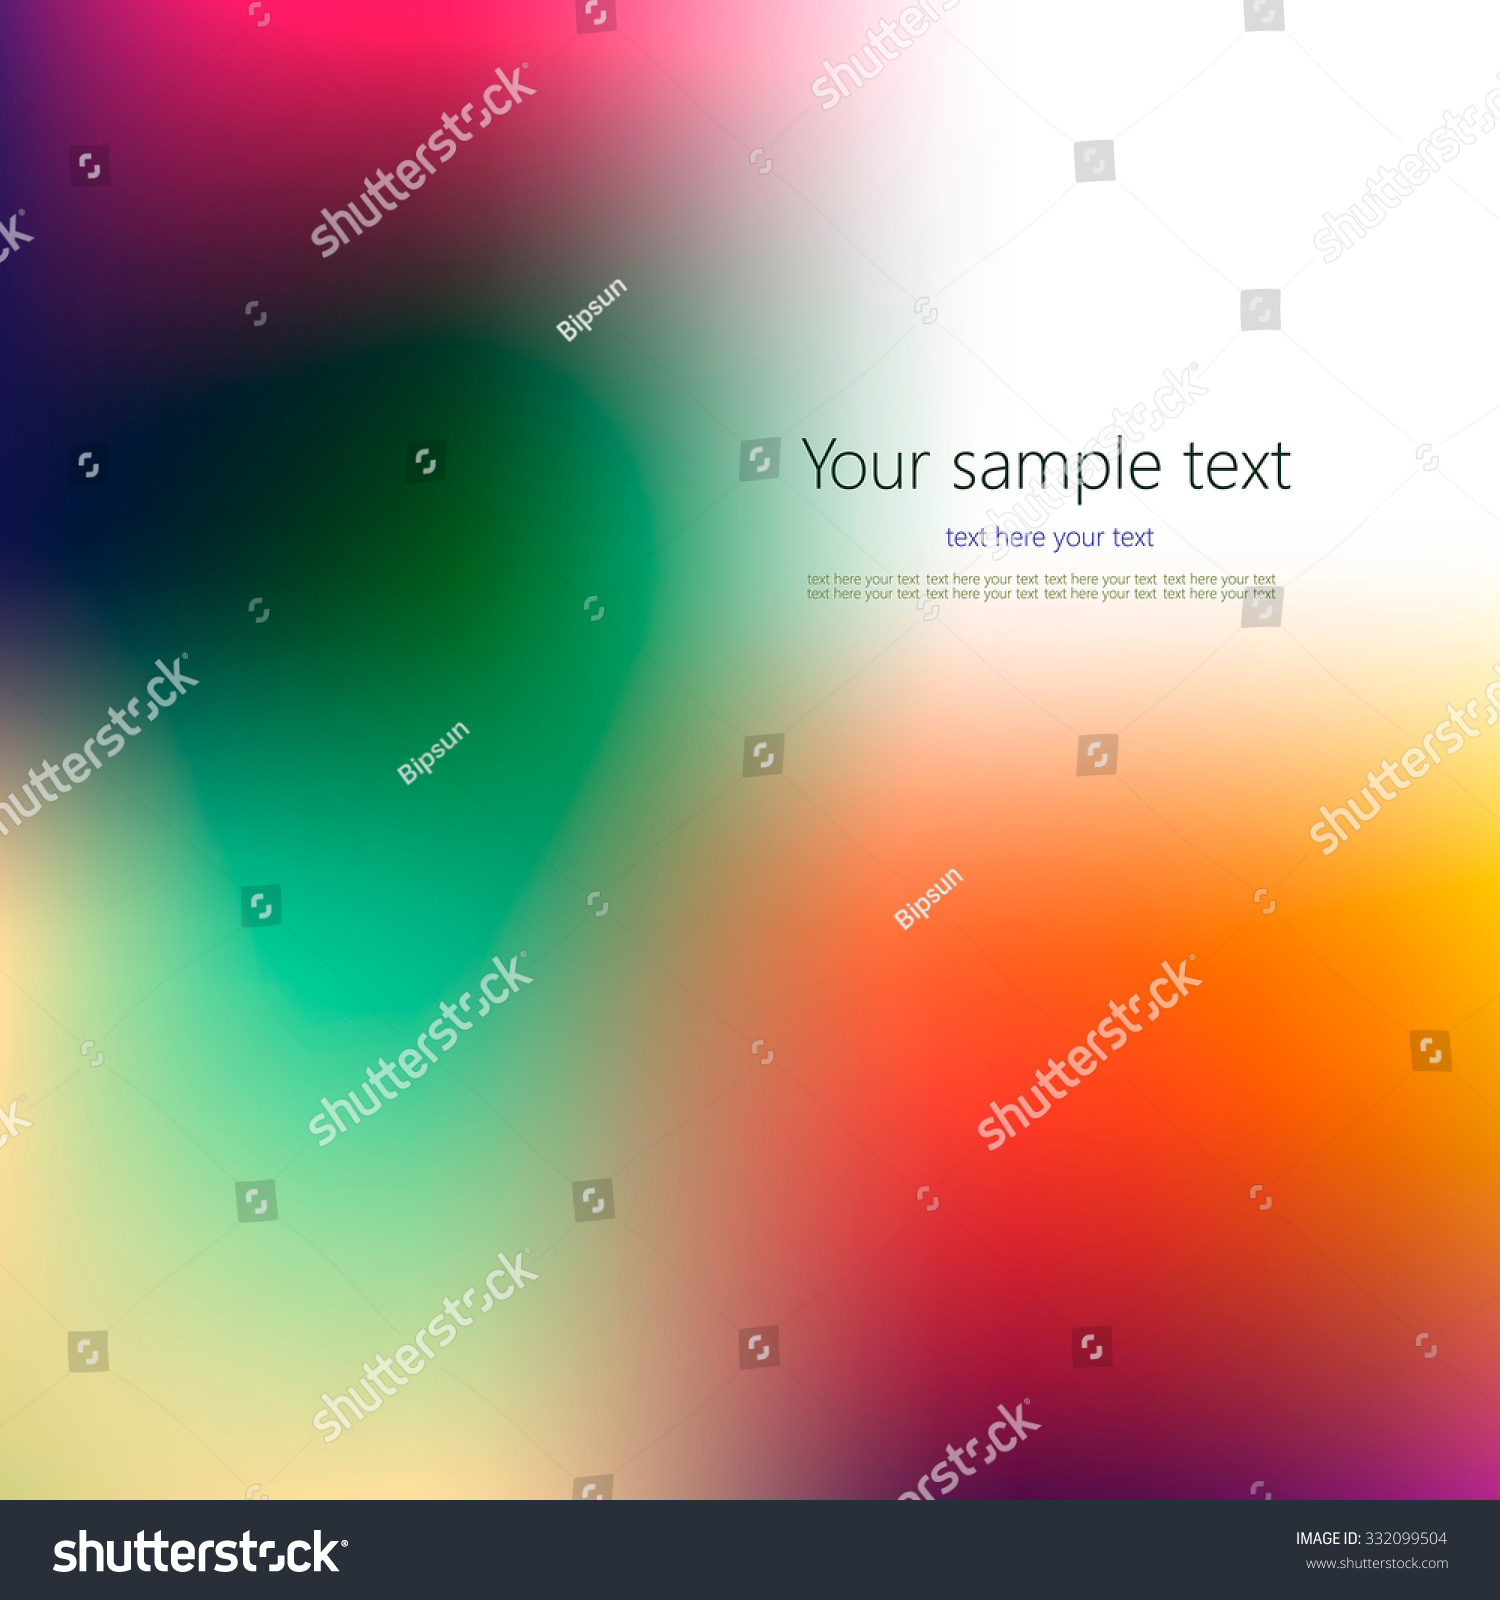 Abstract colorful background with place for your text. #332099504